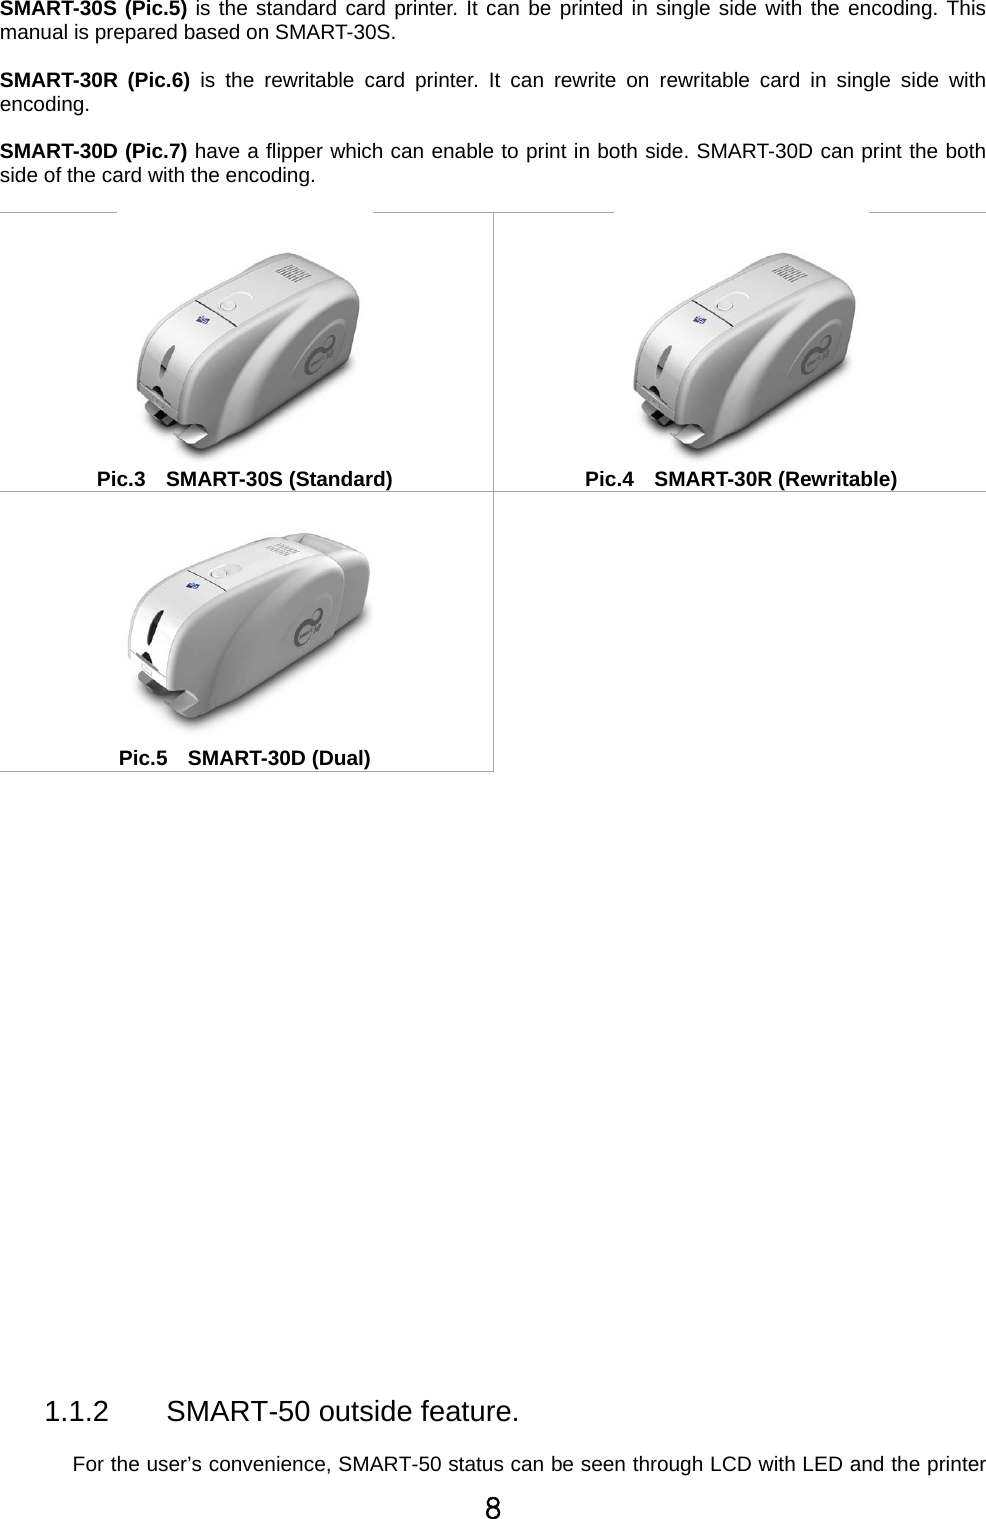 8   SMART-30S (Pic.5) is the standard card printer. It can be printed in single side with the encoding. This manual is prepared based on SMART-30S.  SMART-30R (Pic.6) is the rewritable card printer. It can rewrite on rewritable card in single side with encoding.  SMART-30D (Pic.7) have a flipper which can enable to print in both side. SMART-30D can print the both side of the card with the encoding.   Pic.3  SMART-30S (Standard)   Pic.4  SMART-30R (Rewritable)  Pic.5  SMART-30D (Dual)                              1.1.2  SMART-50 outside feature.  For the user’s convenience, SMART-50 status can be seen through LCD with LED and the printer 